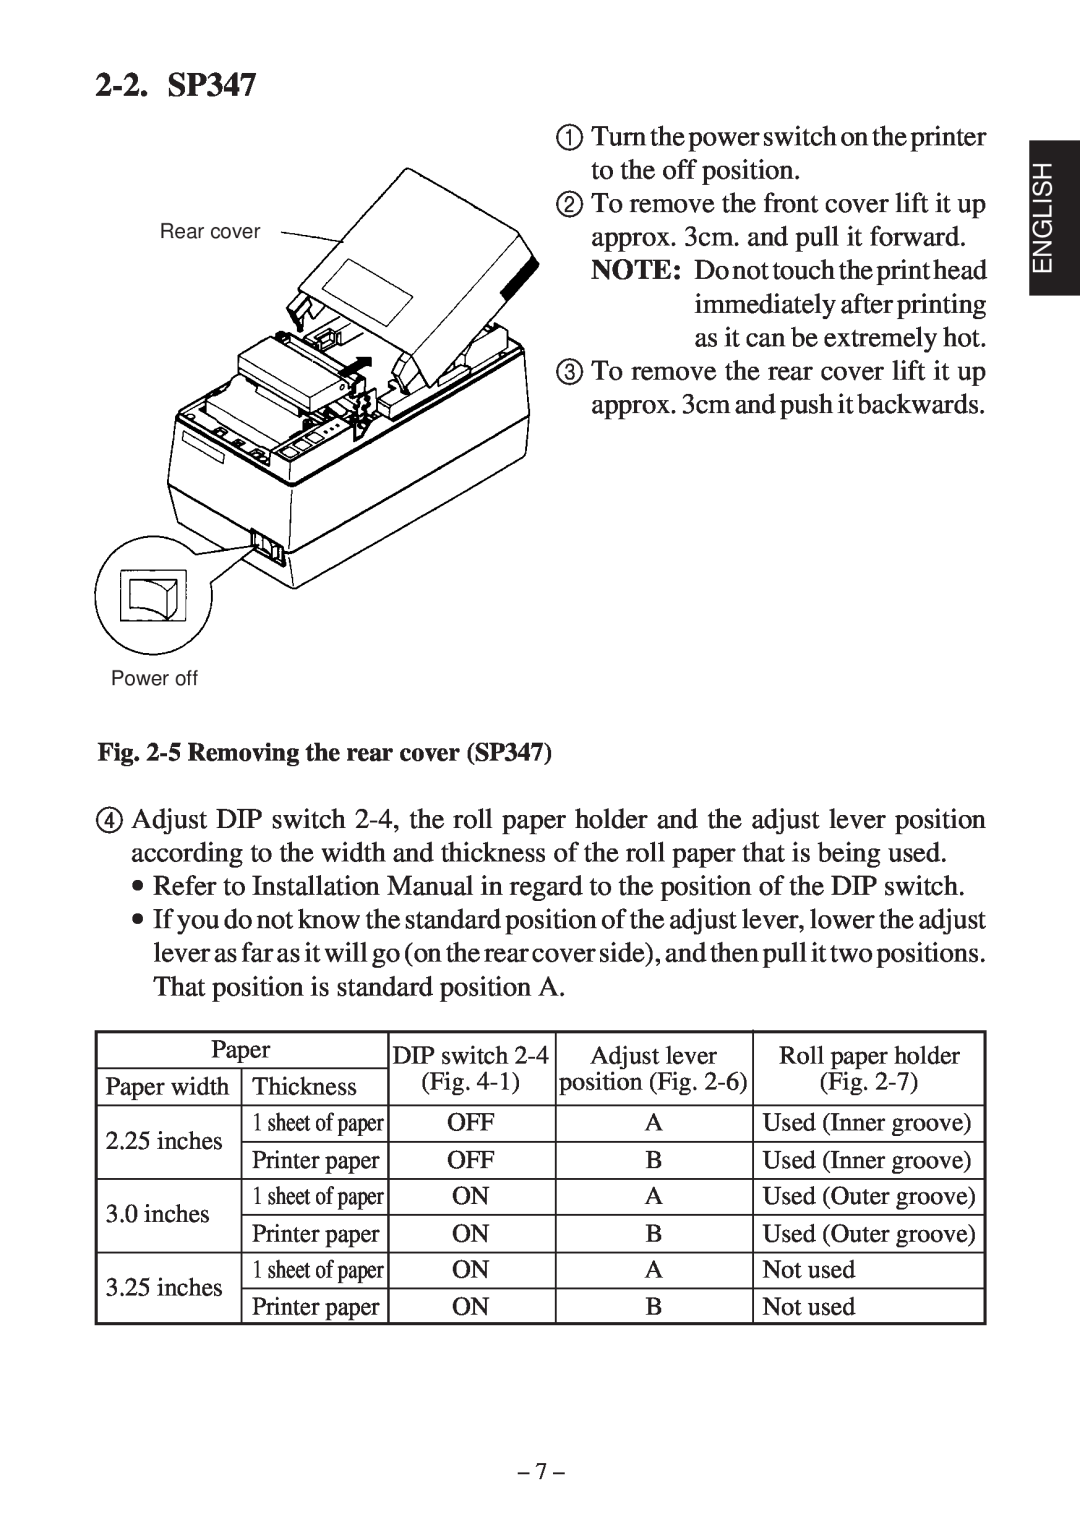 Star Micronics 347F user manual 2-2. SP347, 5 Removing the rear cover SP347 